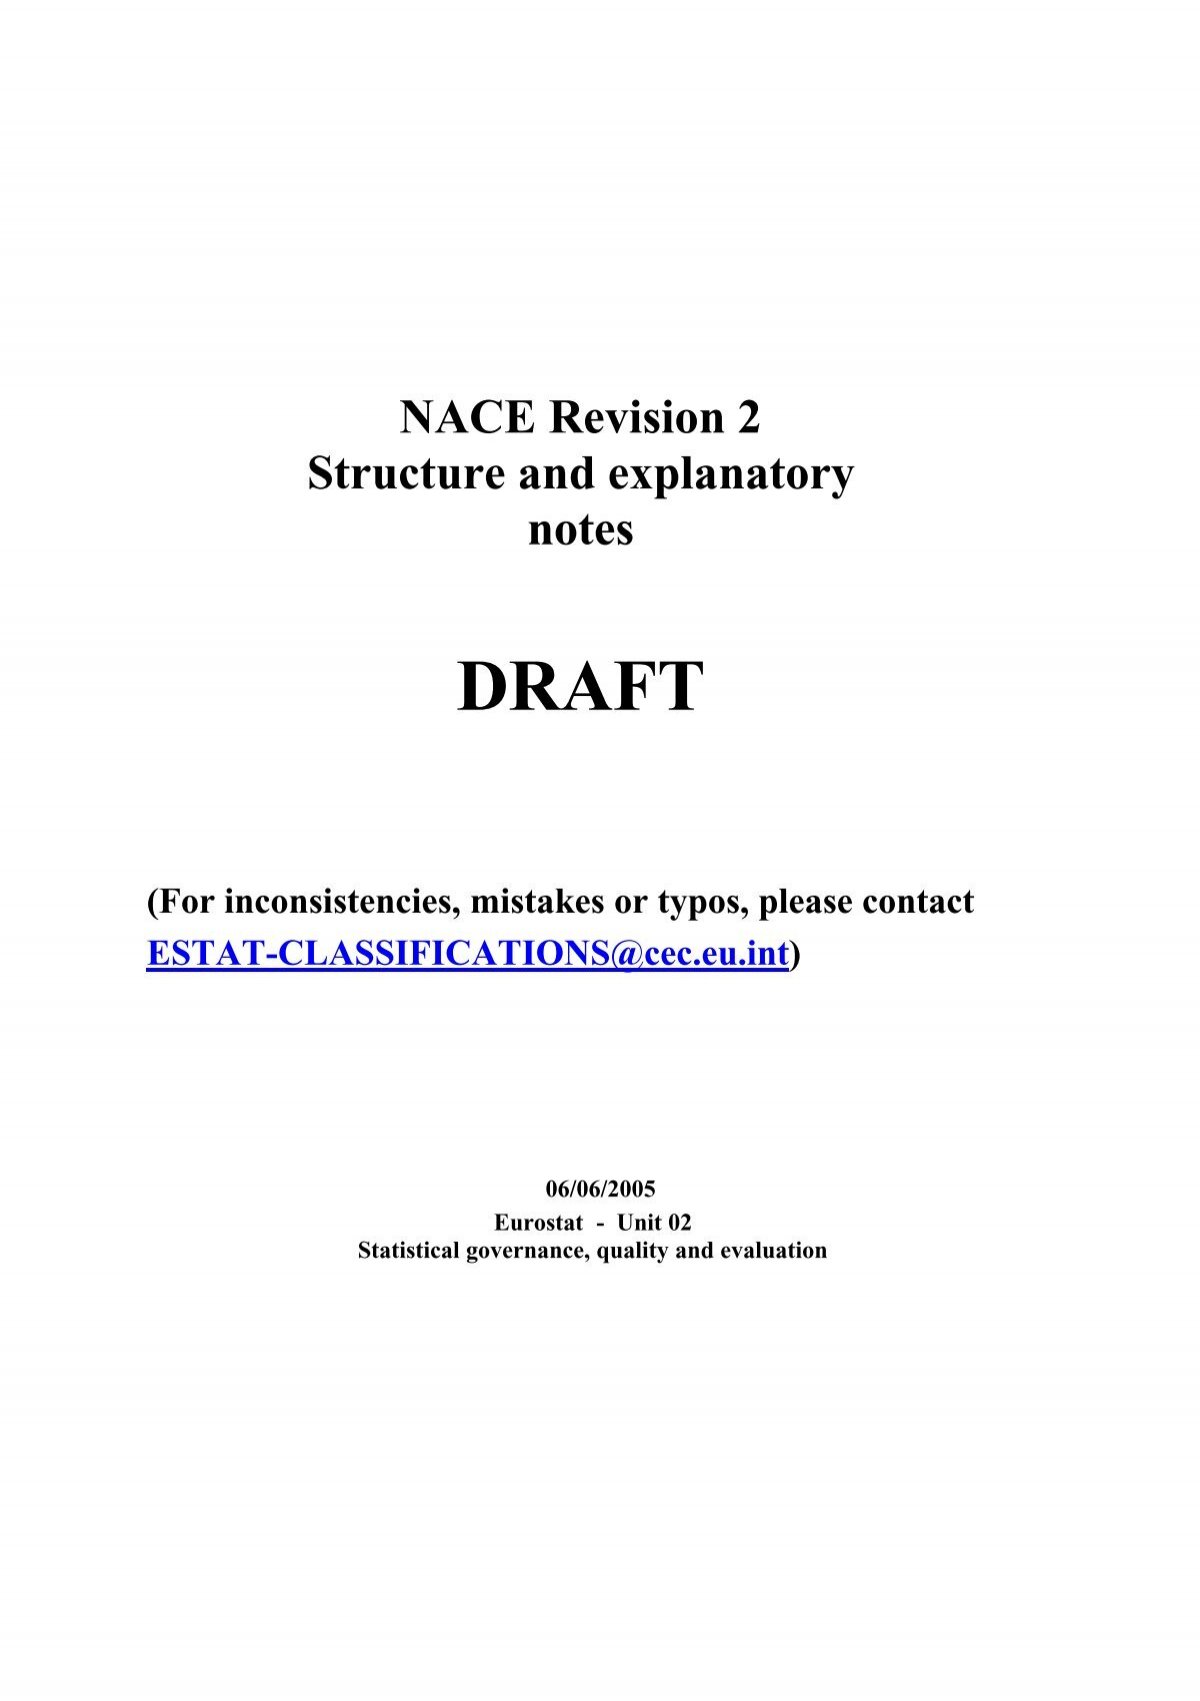 NACE Revision 2 Structure and explanatory notes DRAFT - CIRCA